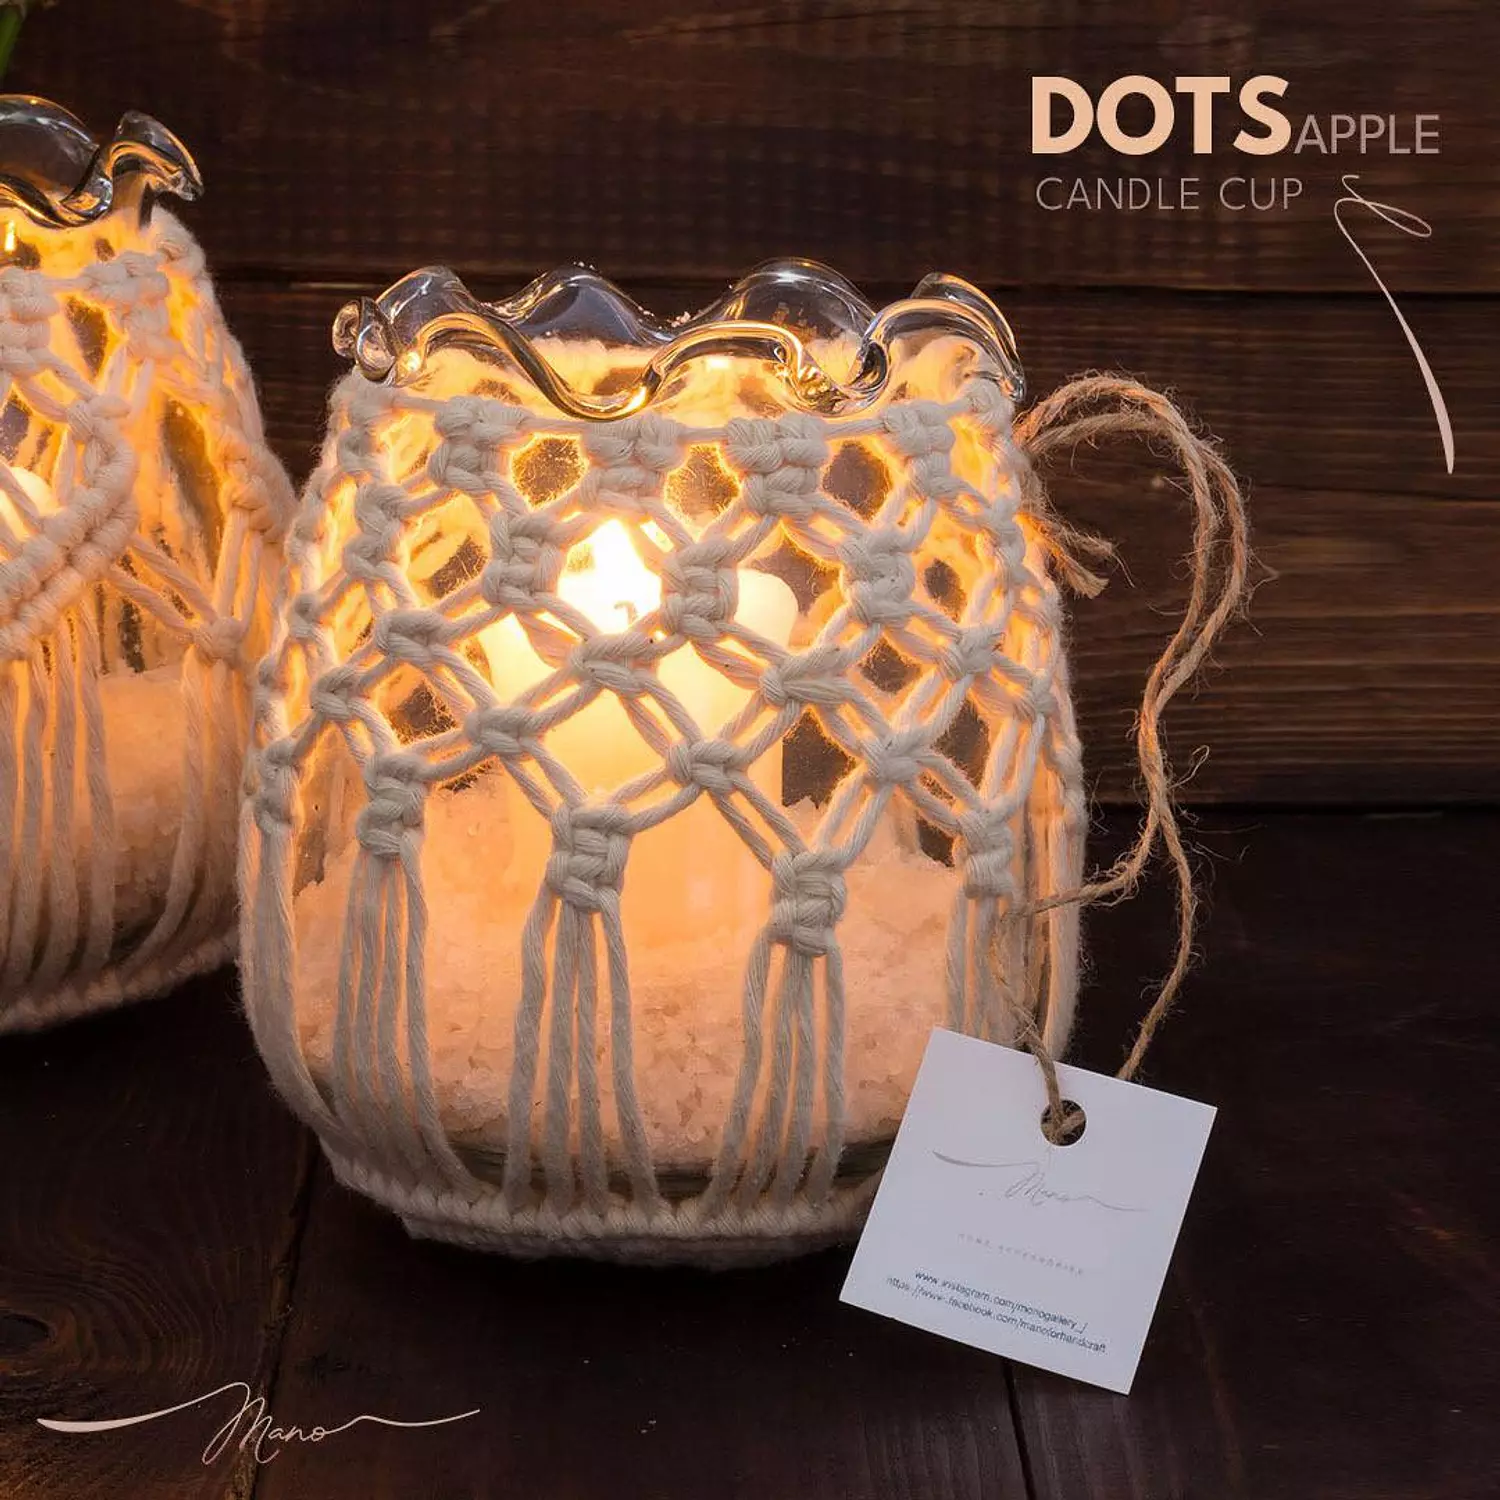 Dots Apple candle cup 0